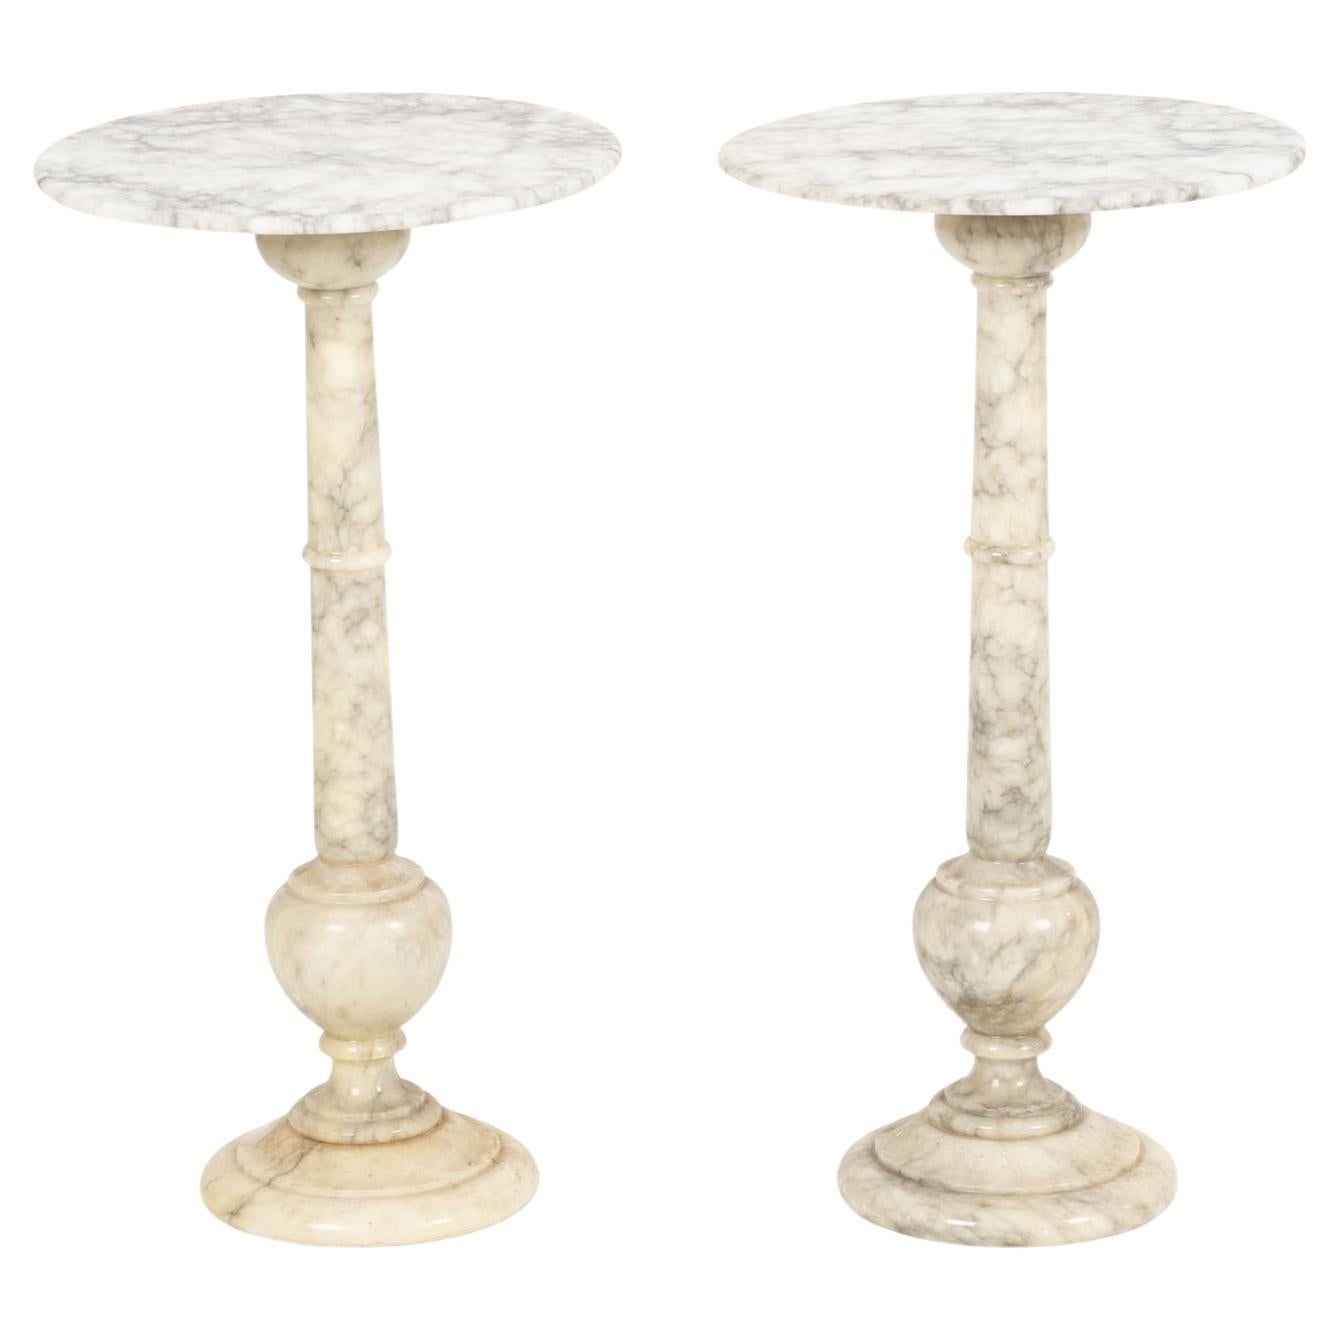 Pair of Alabaster End Tables or Plant or Display Collums